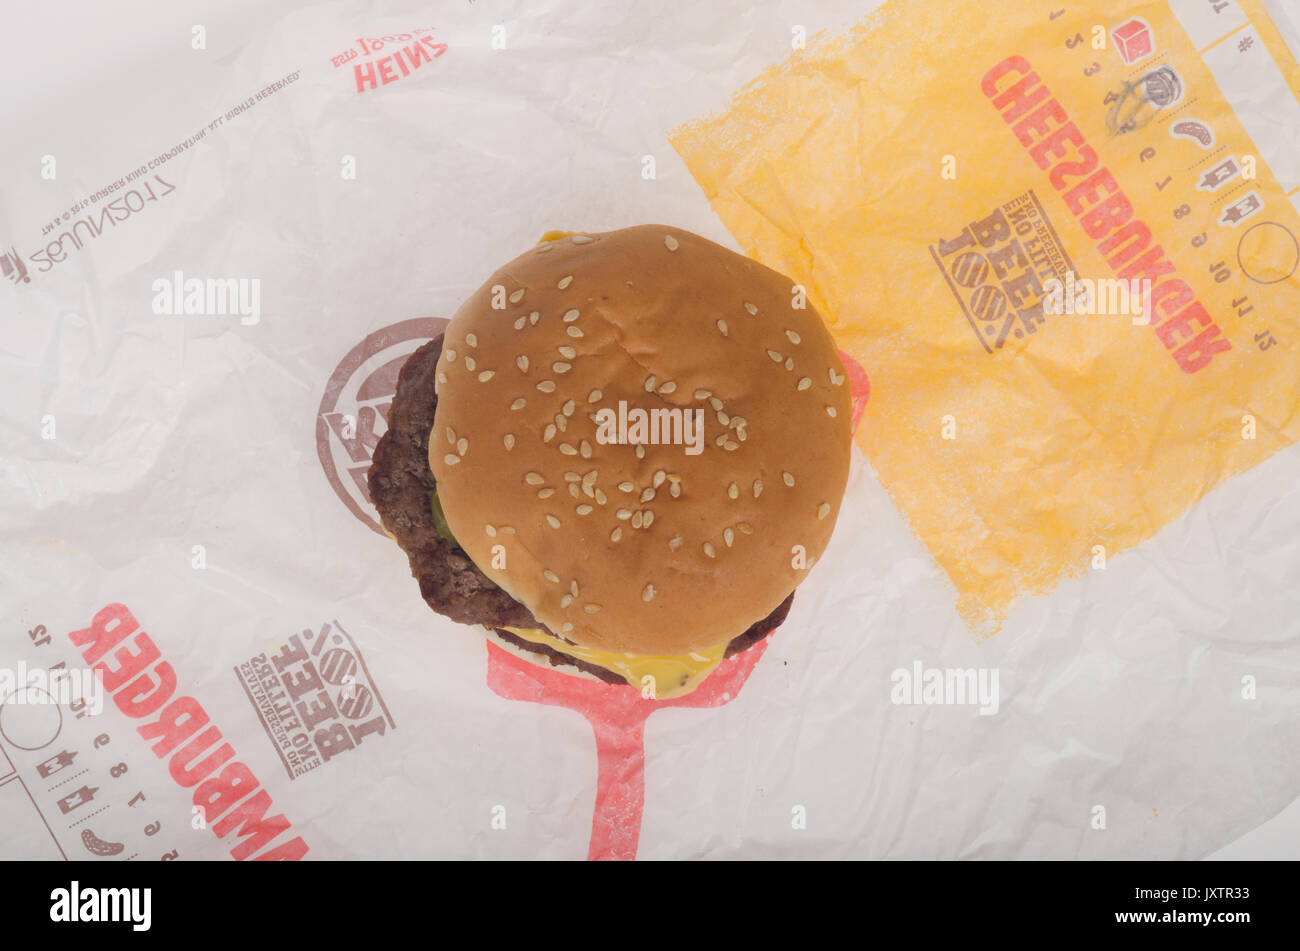 Burger King Double Cheeseburger on paper wrapper, USA Stock Photo